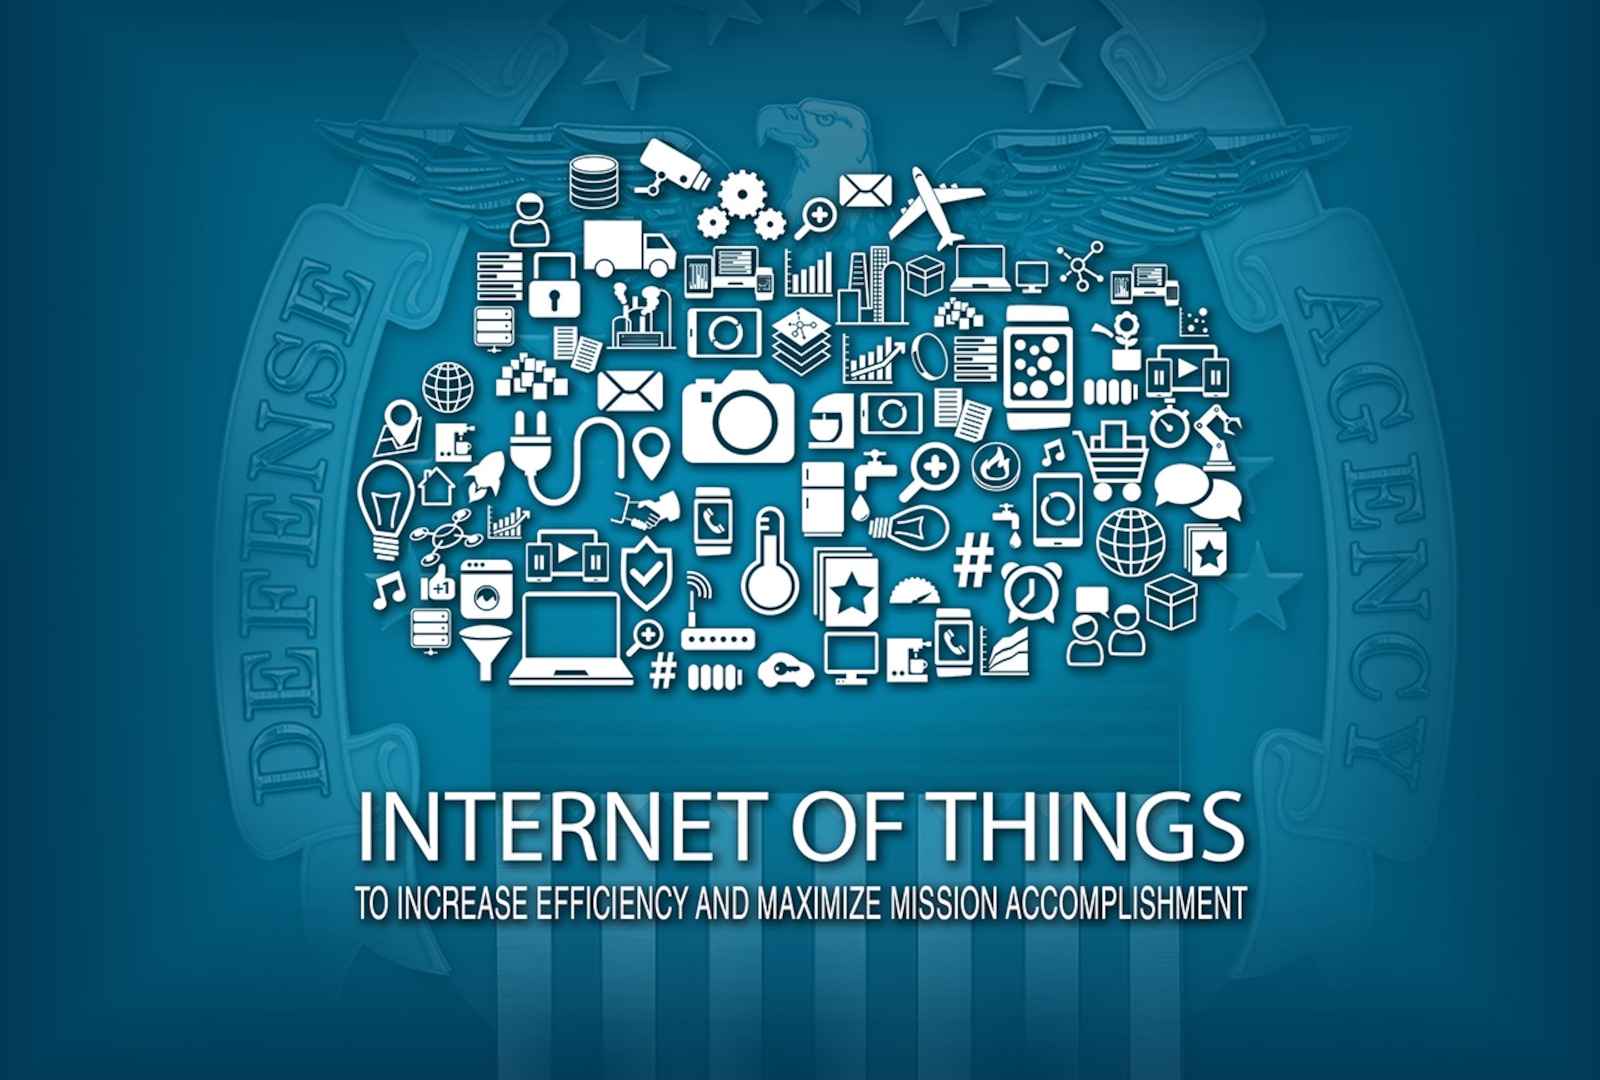 Internet of things iot concept with cloud computing. concept of smart machines always connected via the internet.